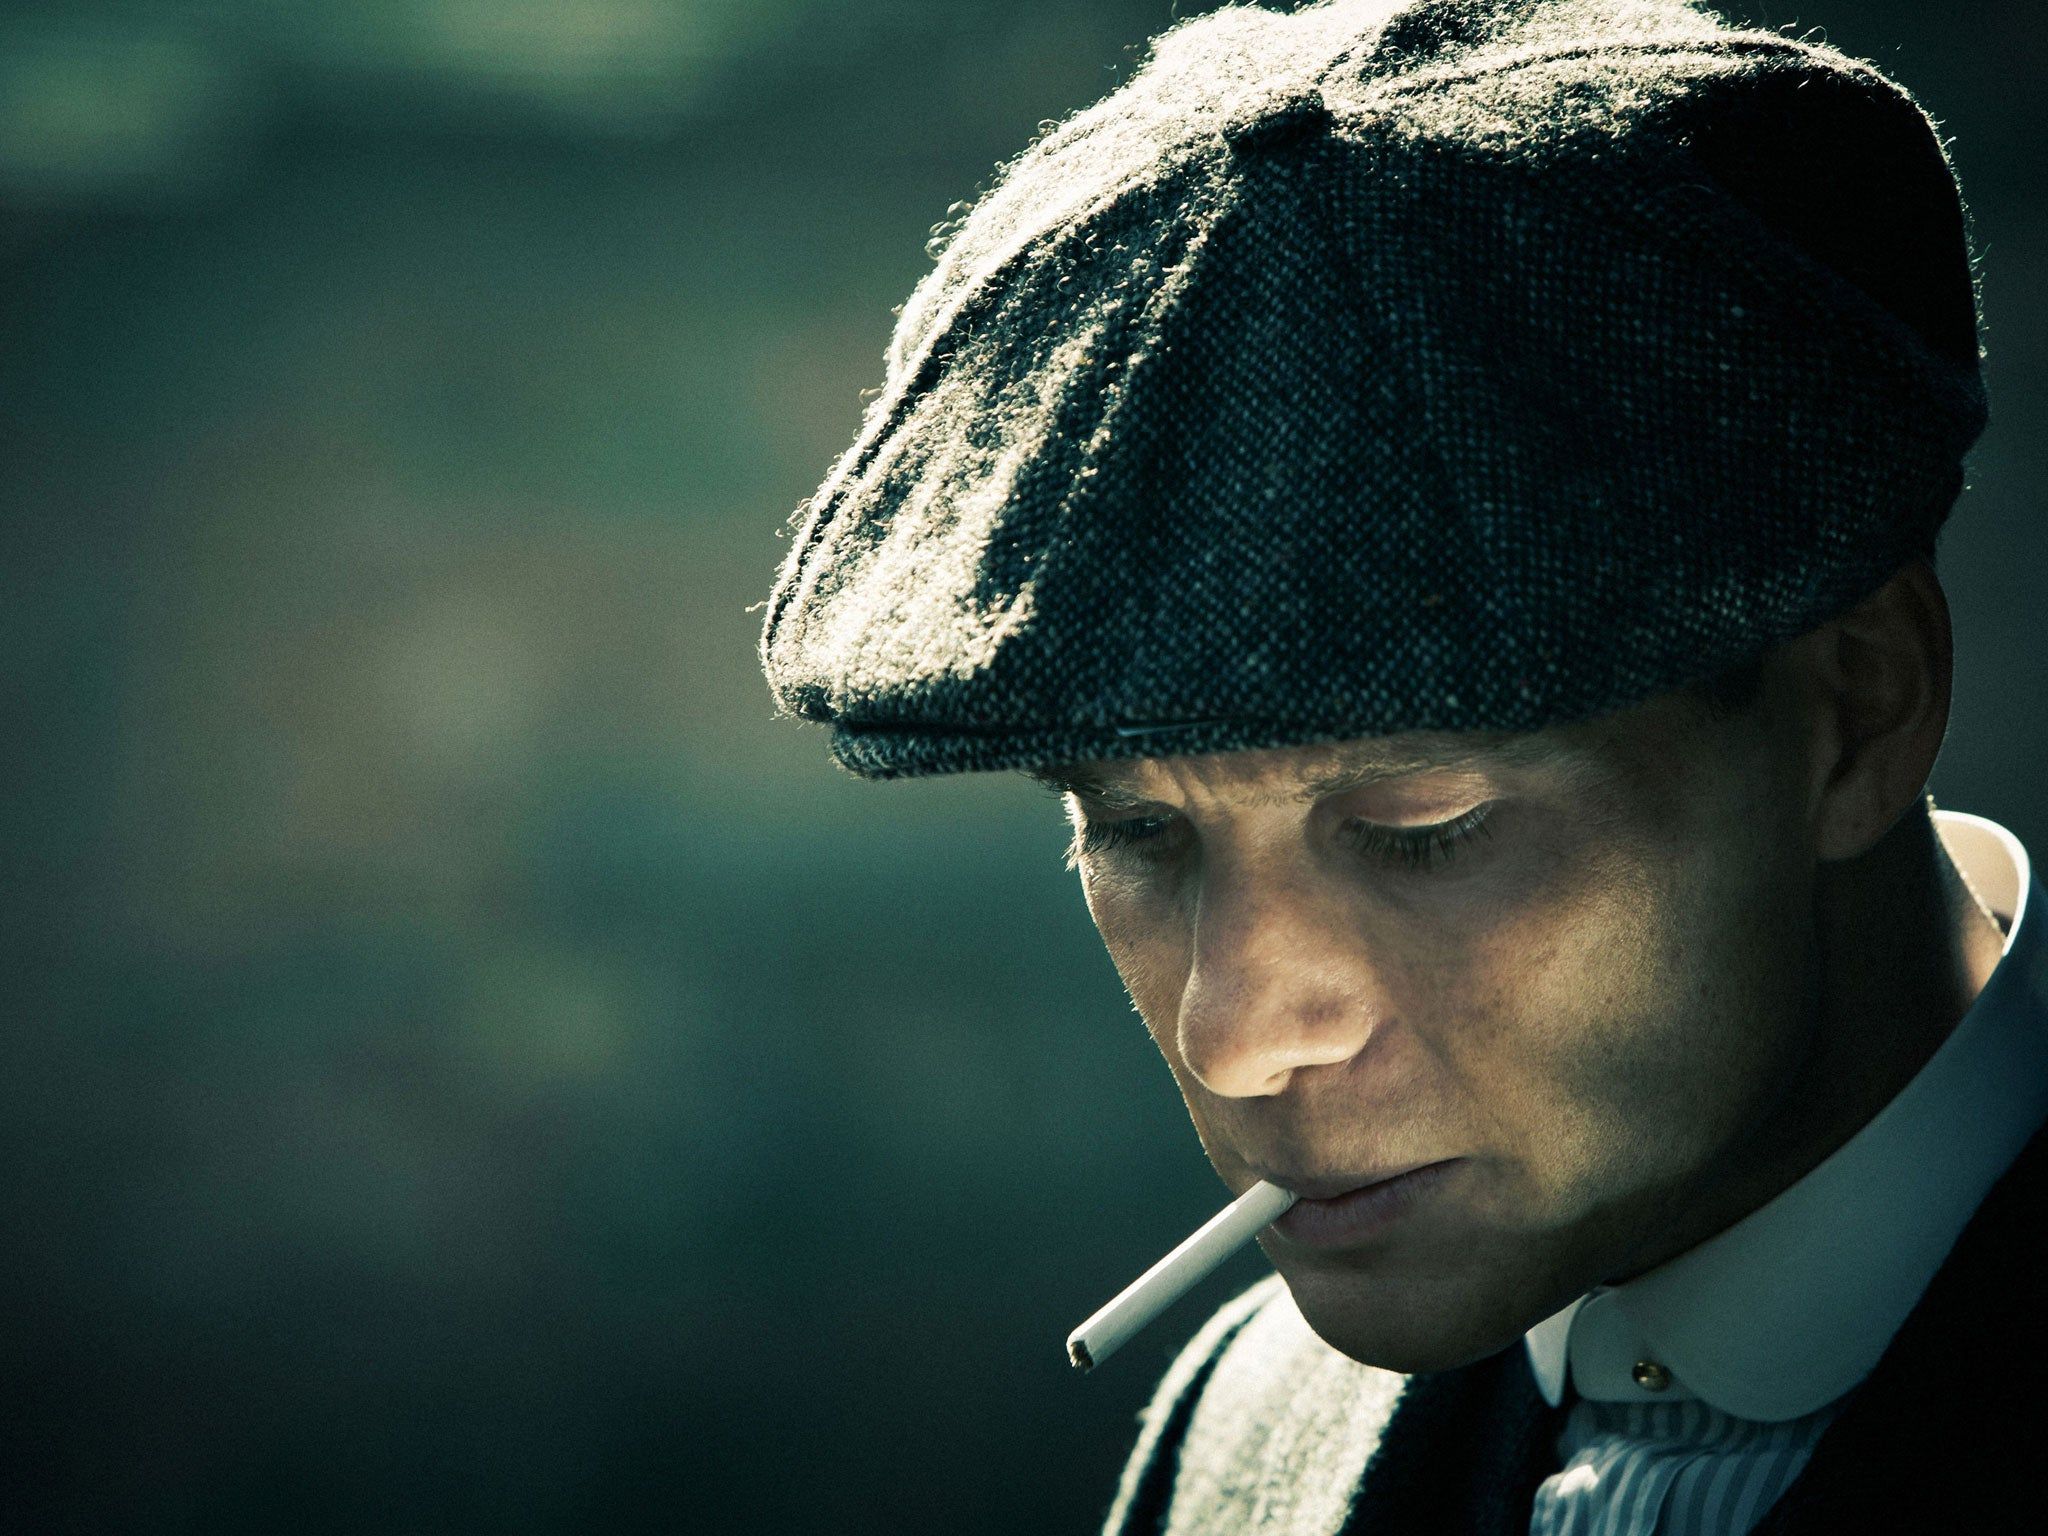 Last night's viewing: Peaky Blinders is no ordinary period drama